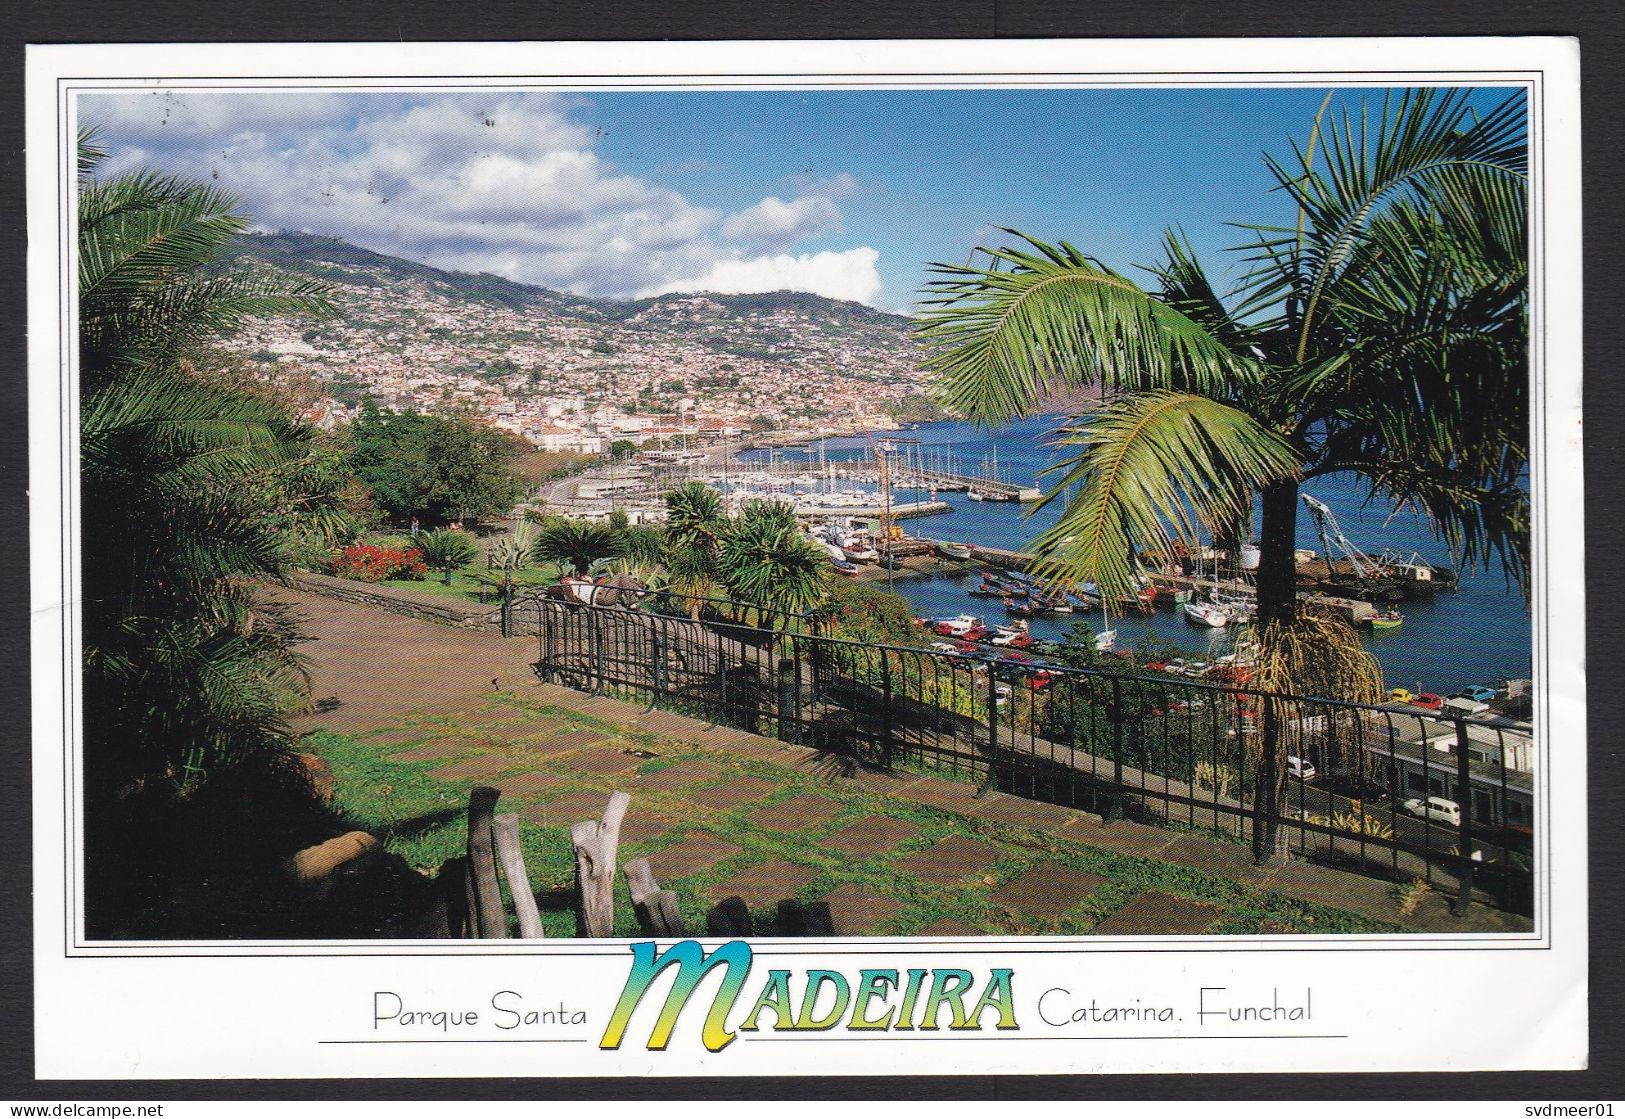 Portugal: Picture Postcard To Germany, 2002, 2 Stamps, Bird, Coin, Money, Card: Funchal Madeira (minor Crease) - Lettres & Documents